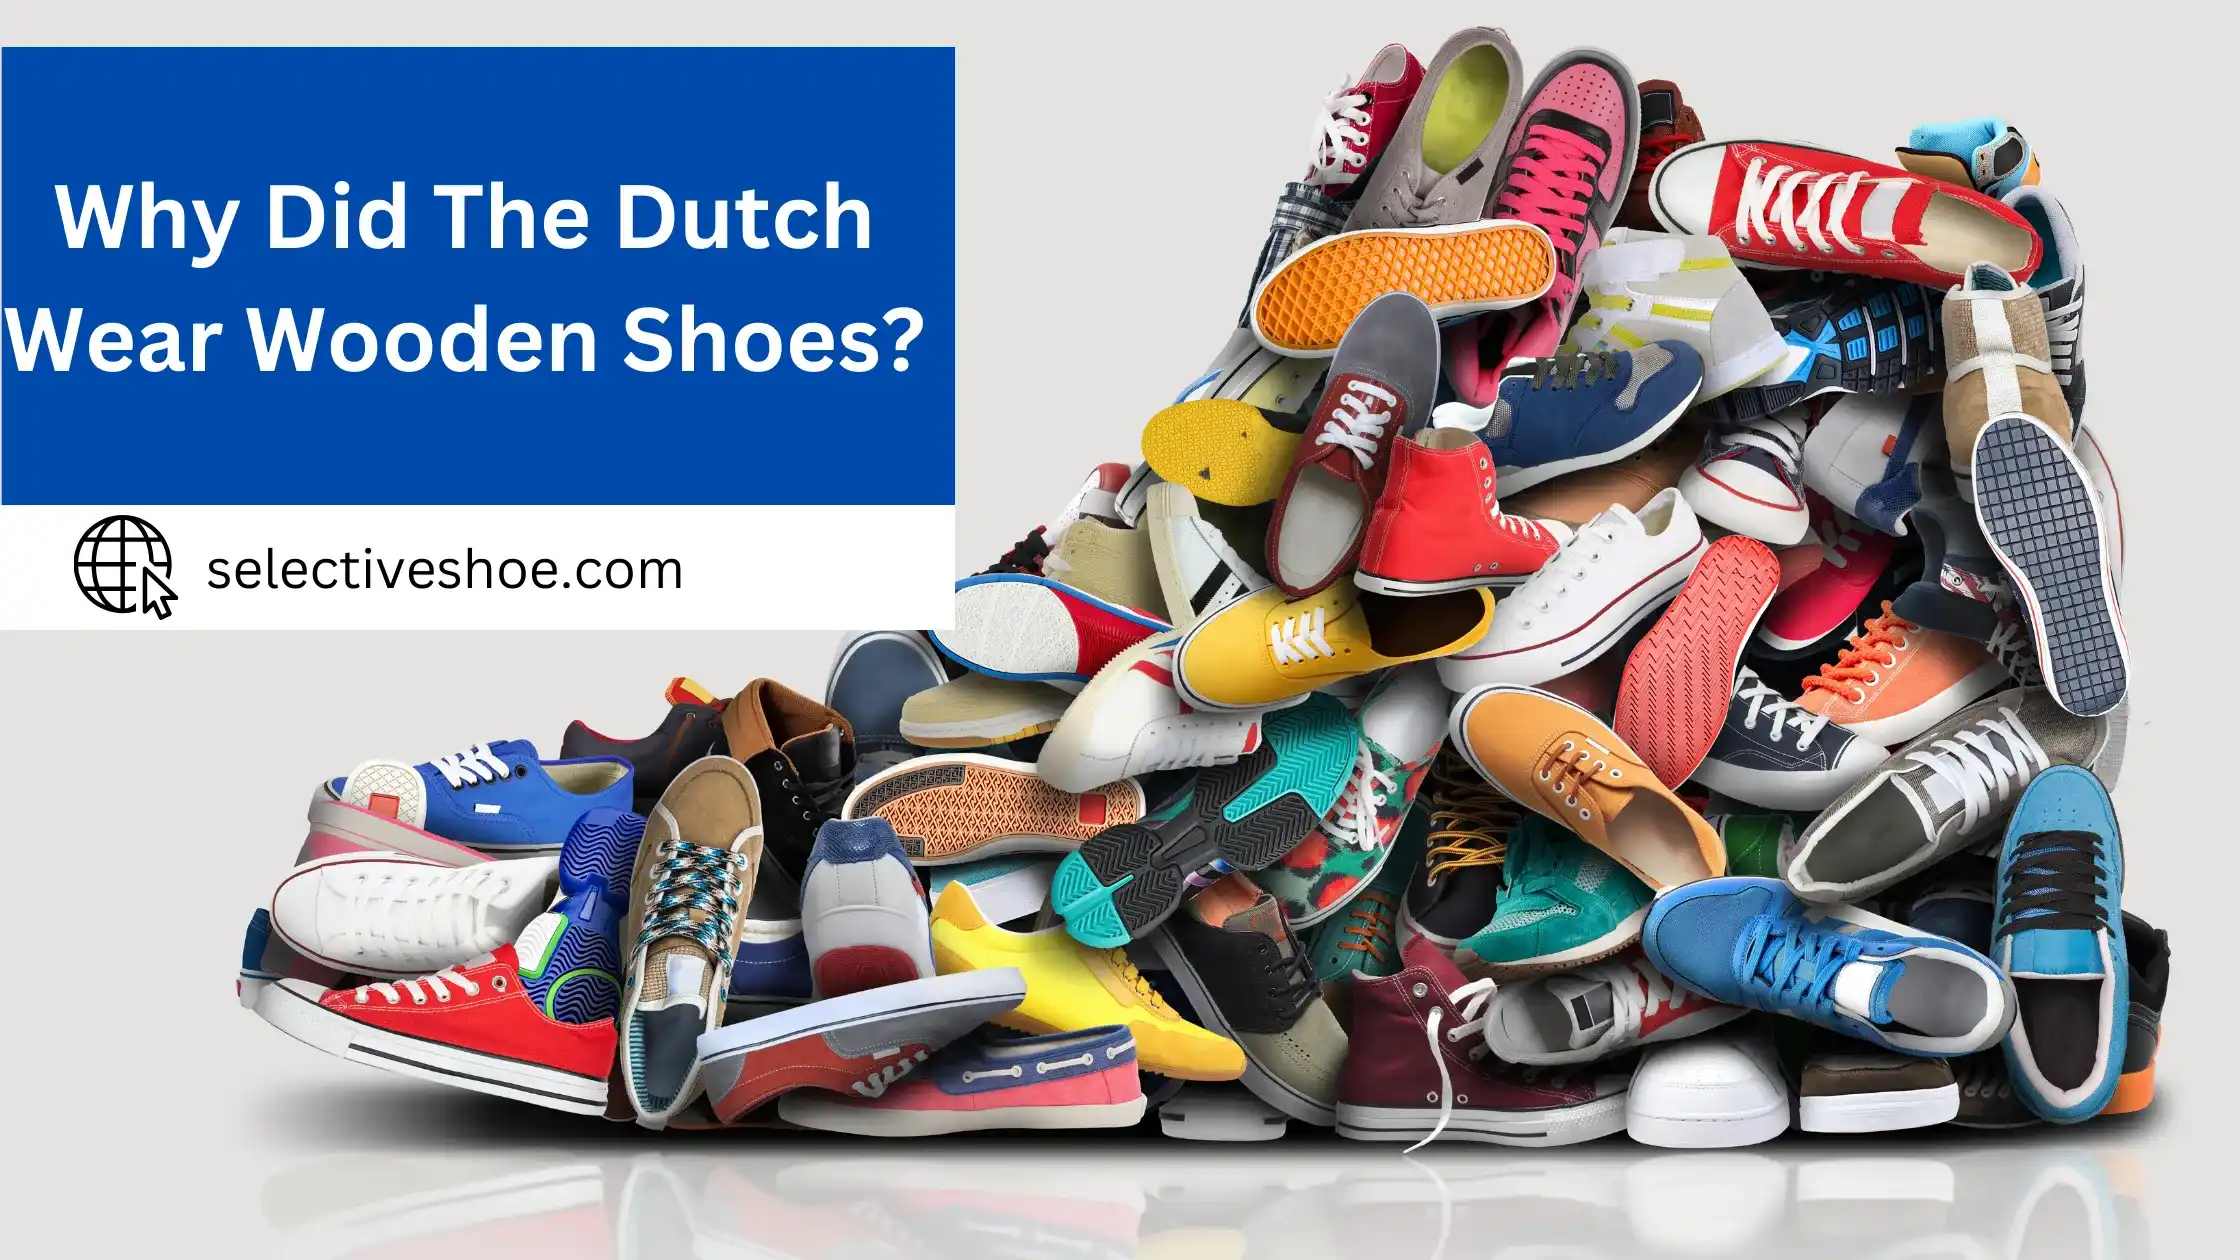 Why Did The Dutch Wear Wooden Shoes? (An In-Depth Guide)